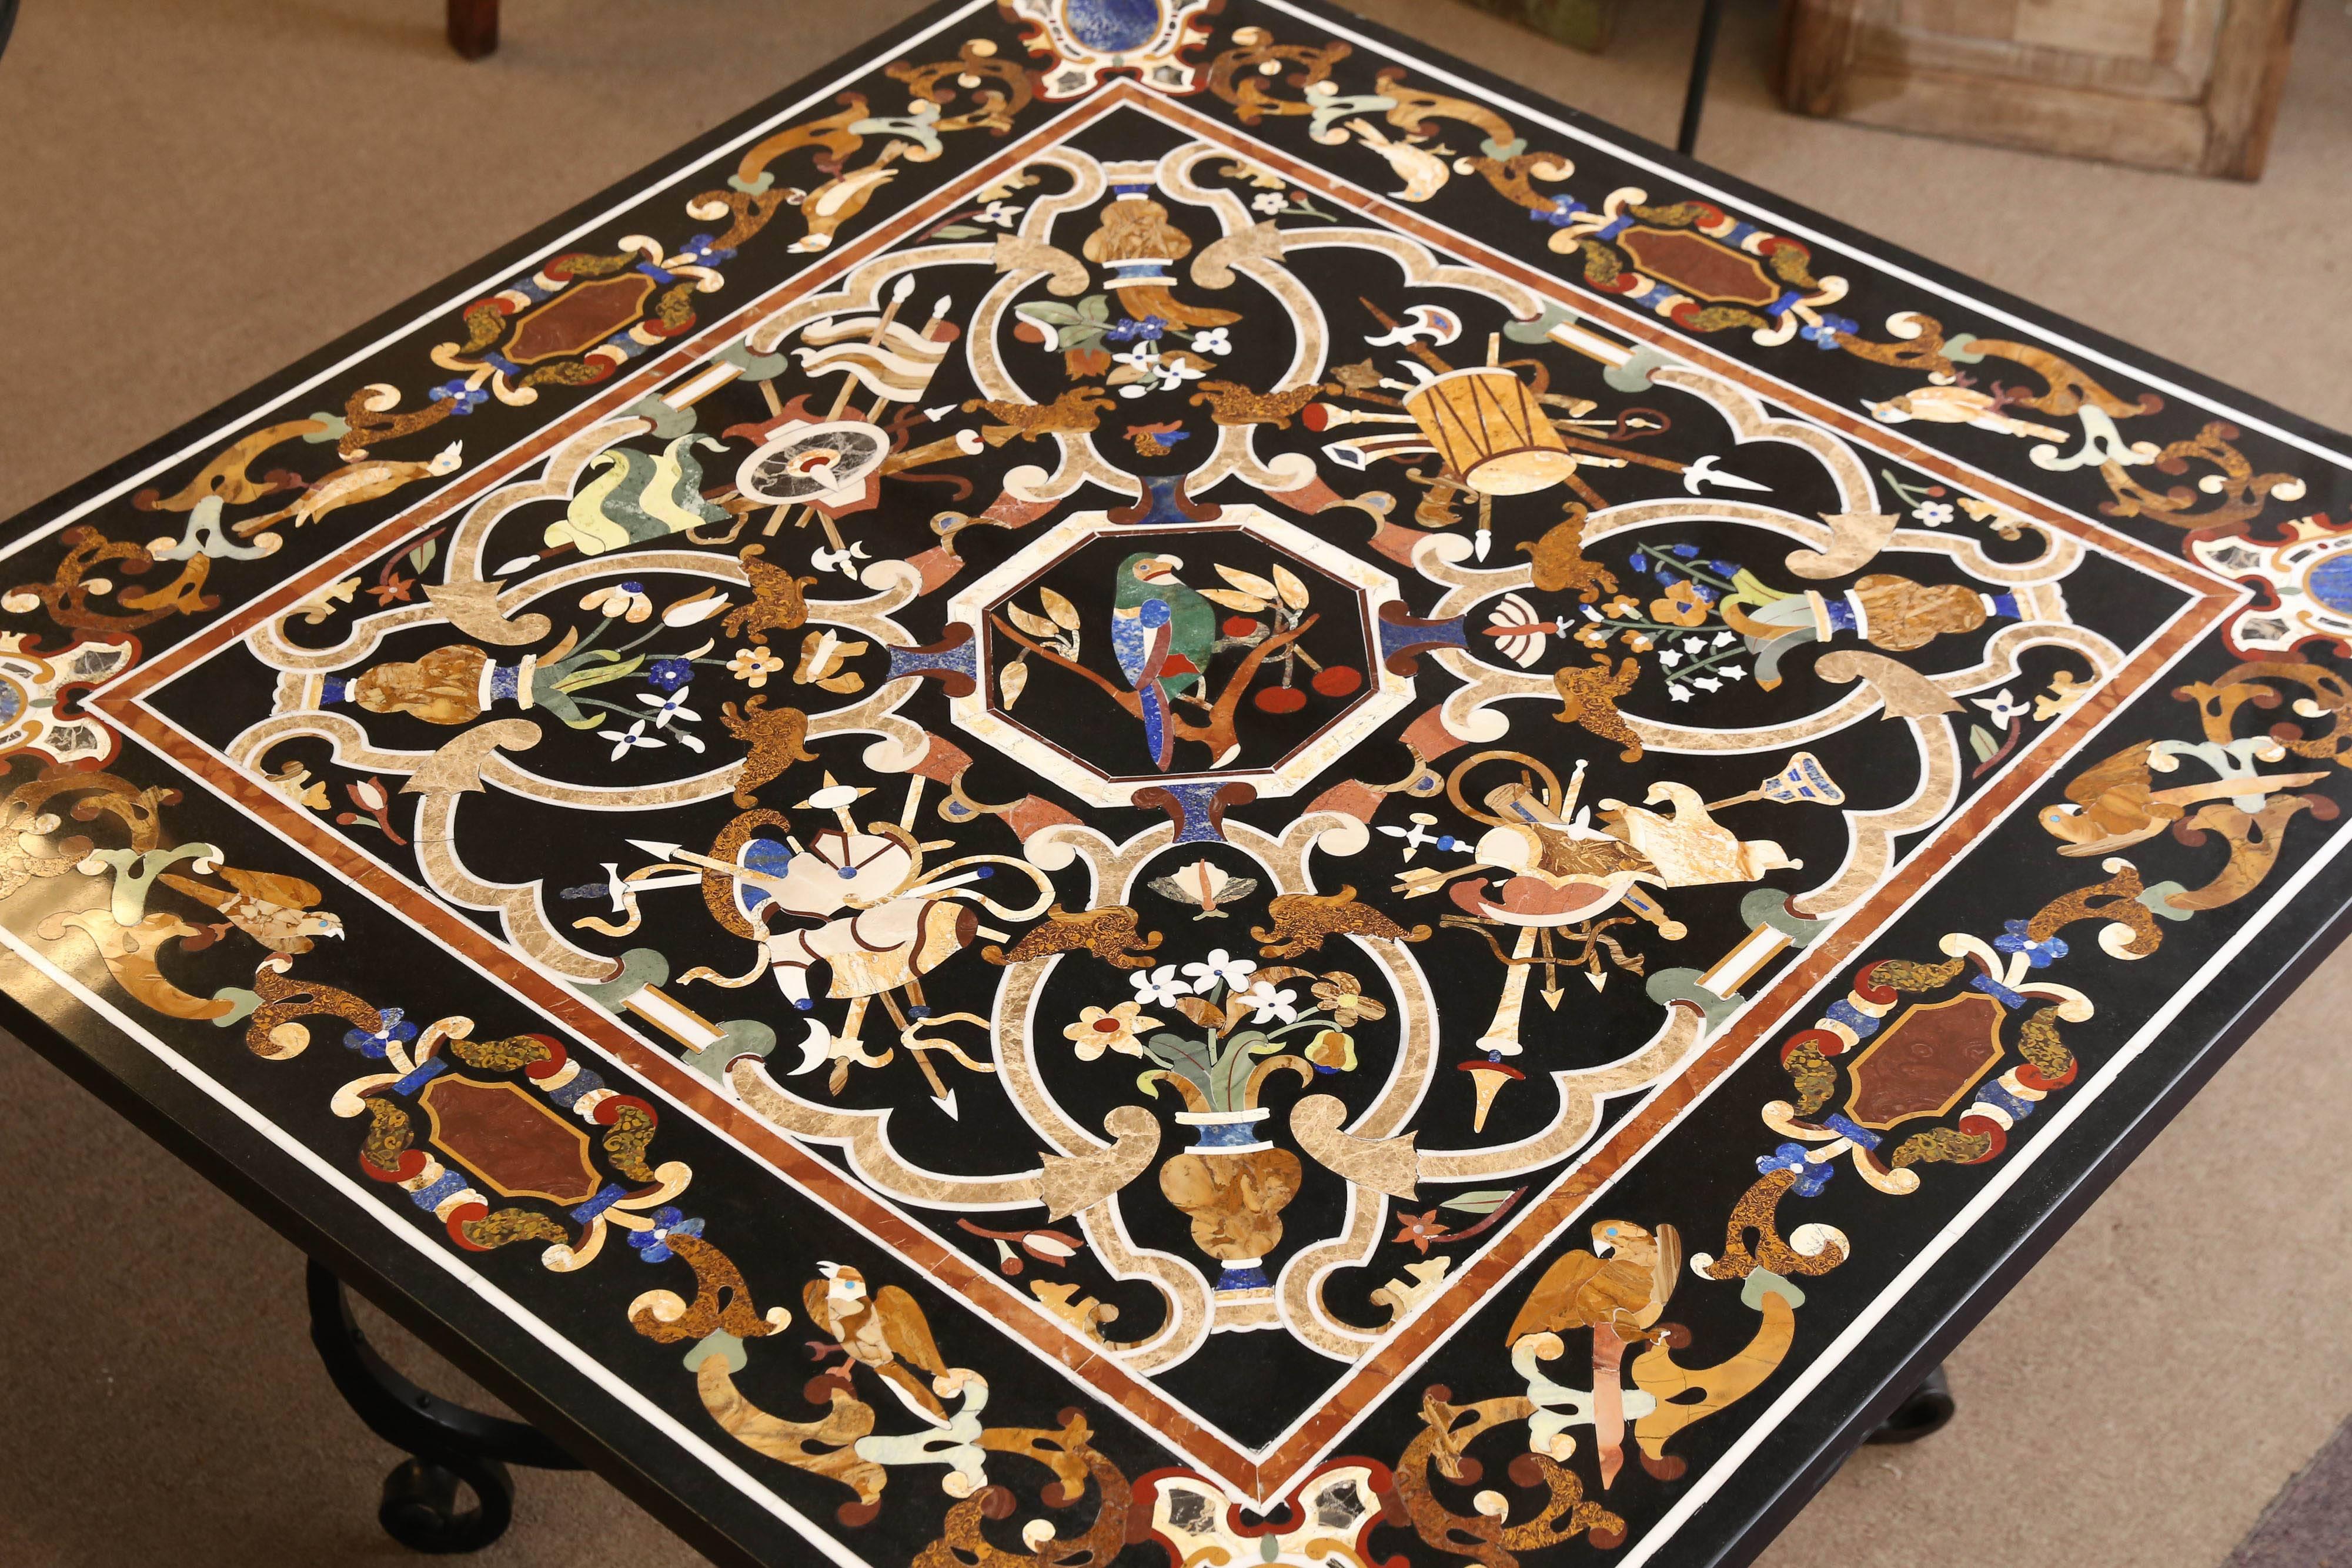 This entry table is exquisitely inlaid with semi-precious stones and other rare marbles. It is practically resistant to scratch. Animal figures like birds and plant leaves from Italian folklore are inlaid with precision and details. A great table by